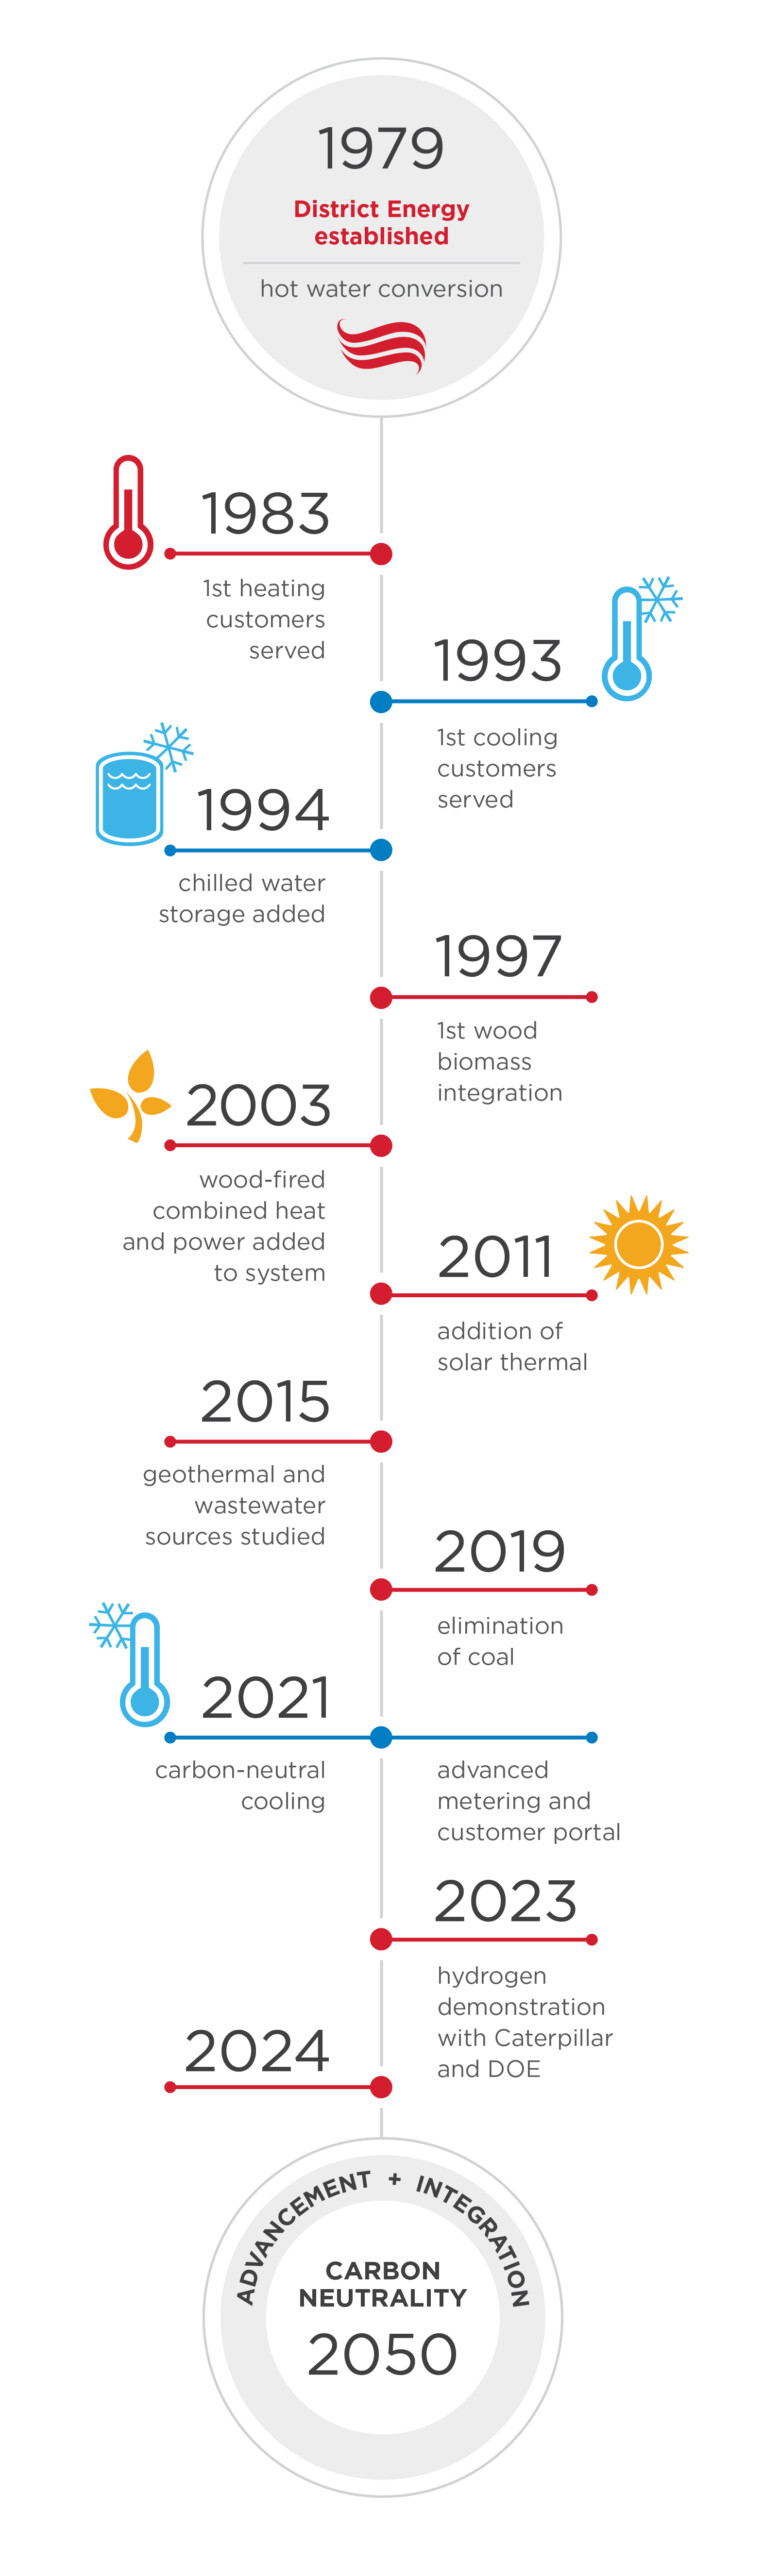 District Energy Timeline to Carbon Neutrality